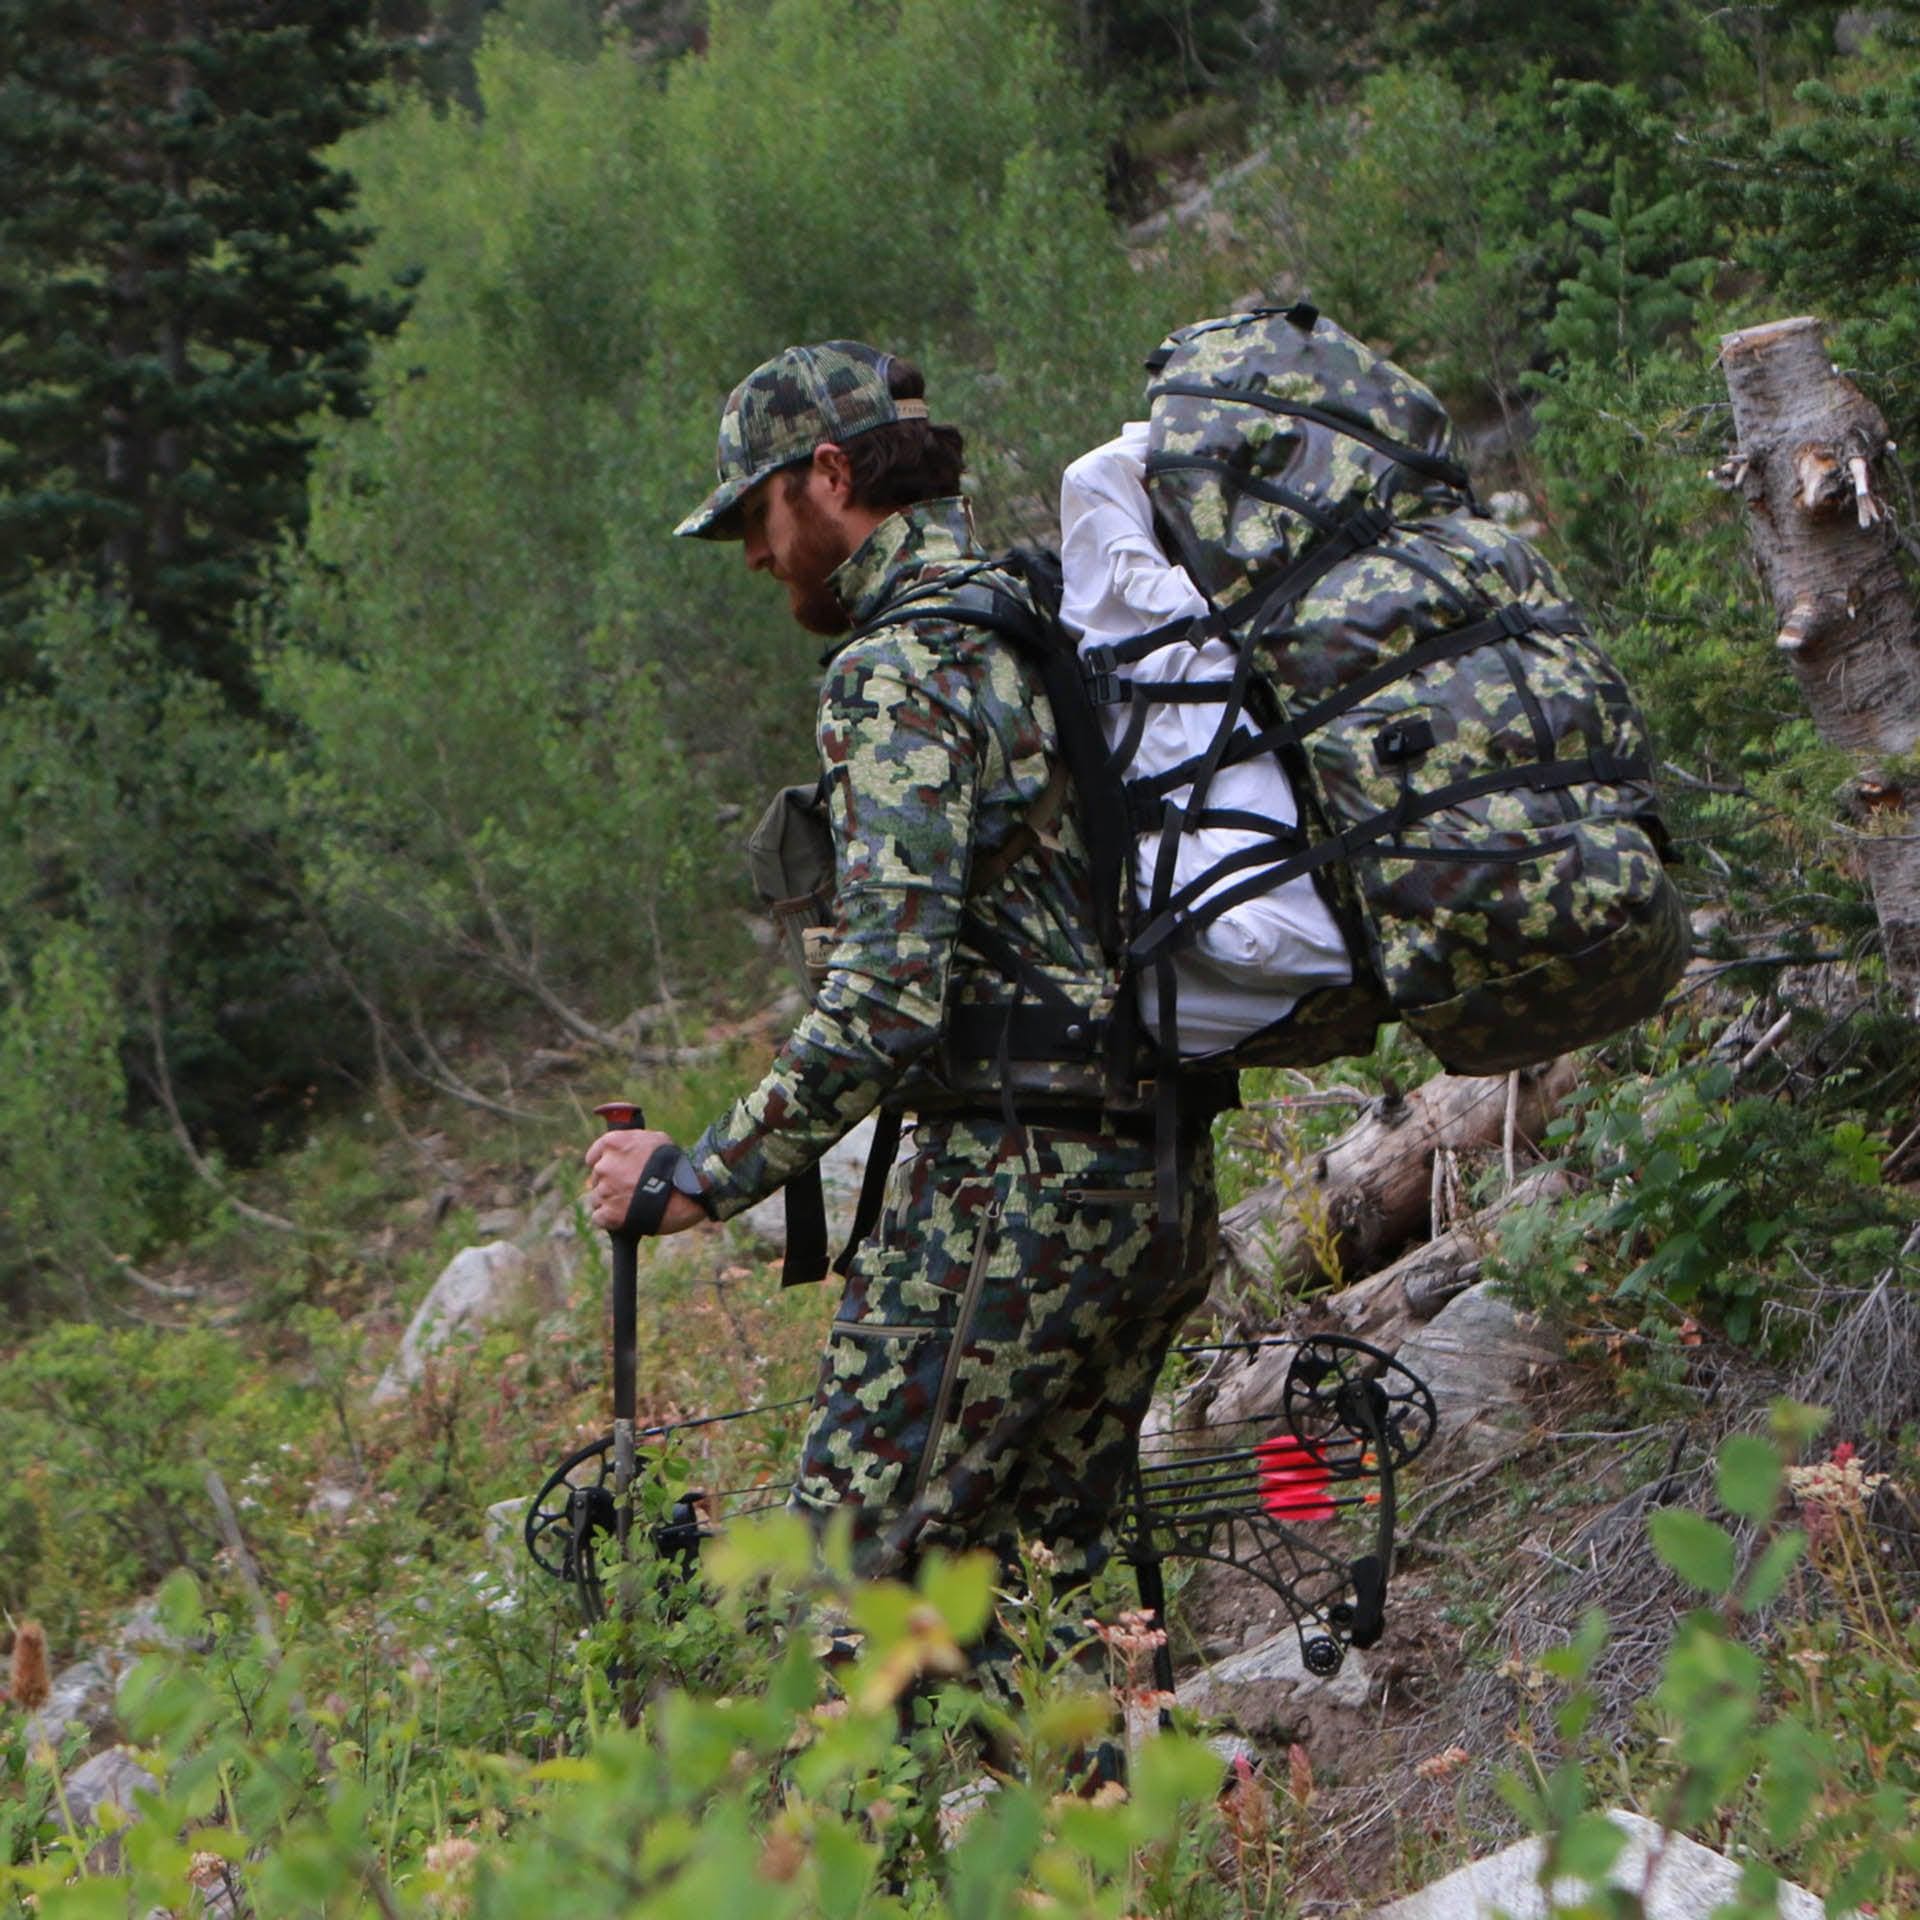 Products-Pack Out Bags, elk hunting packs, hunting bags